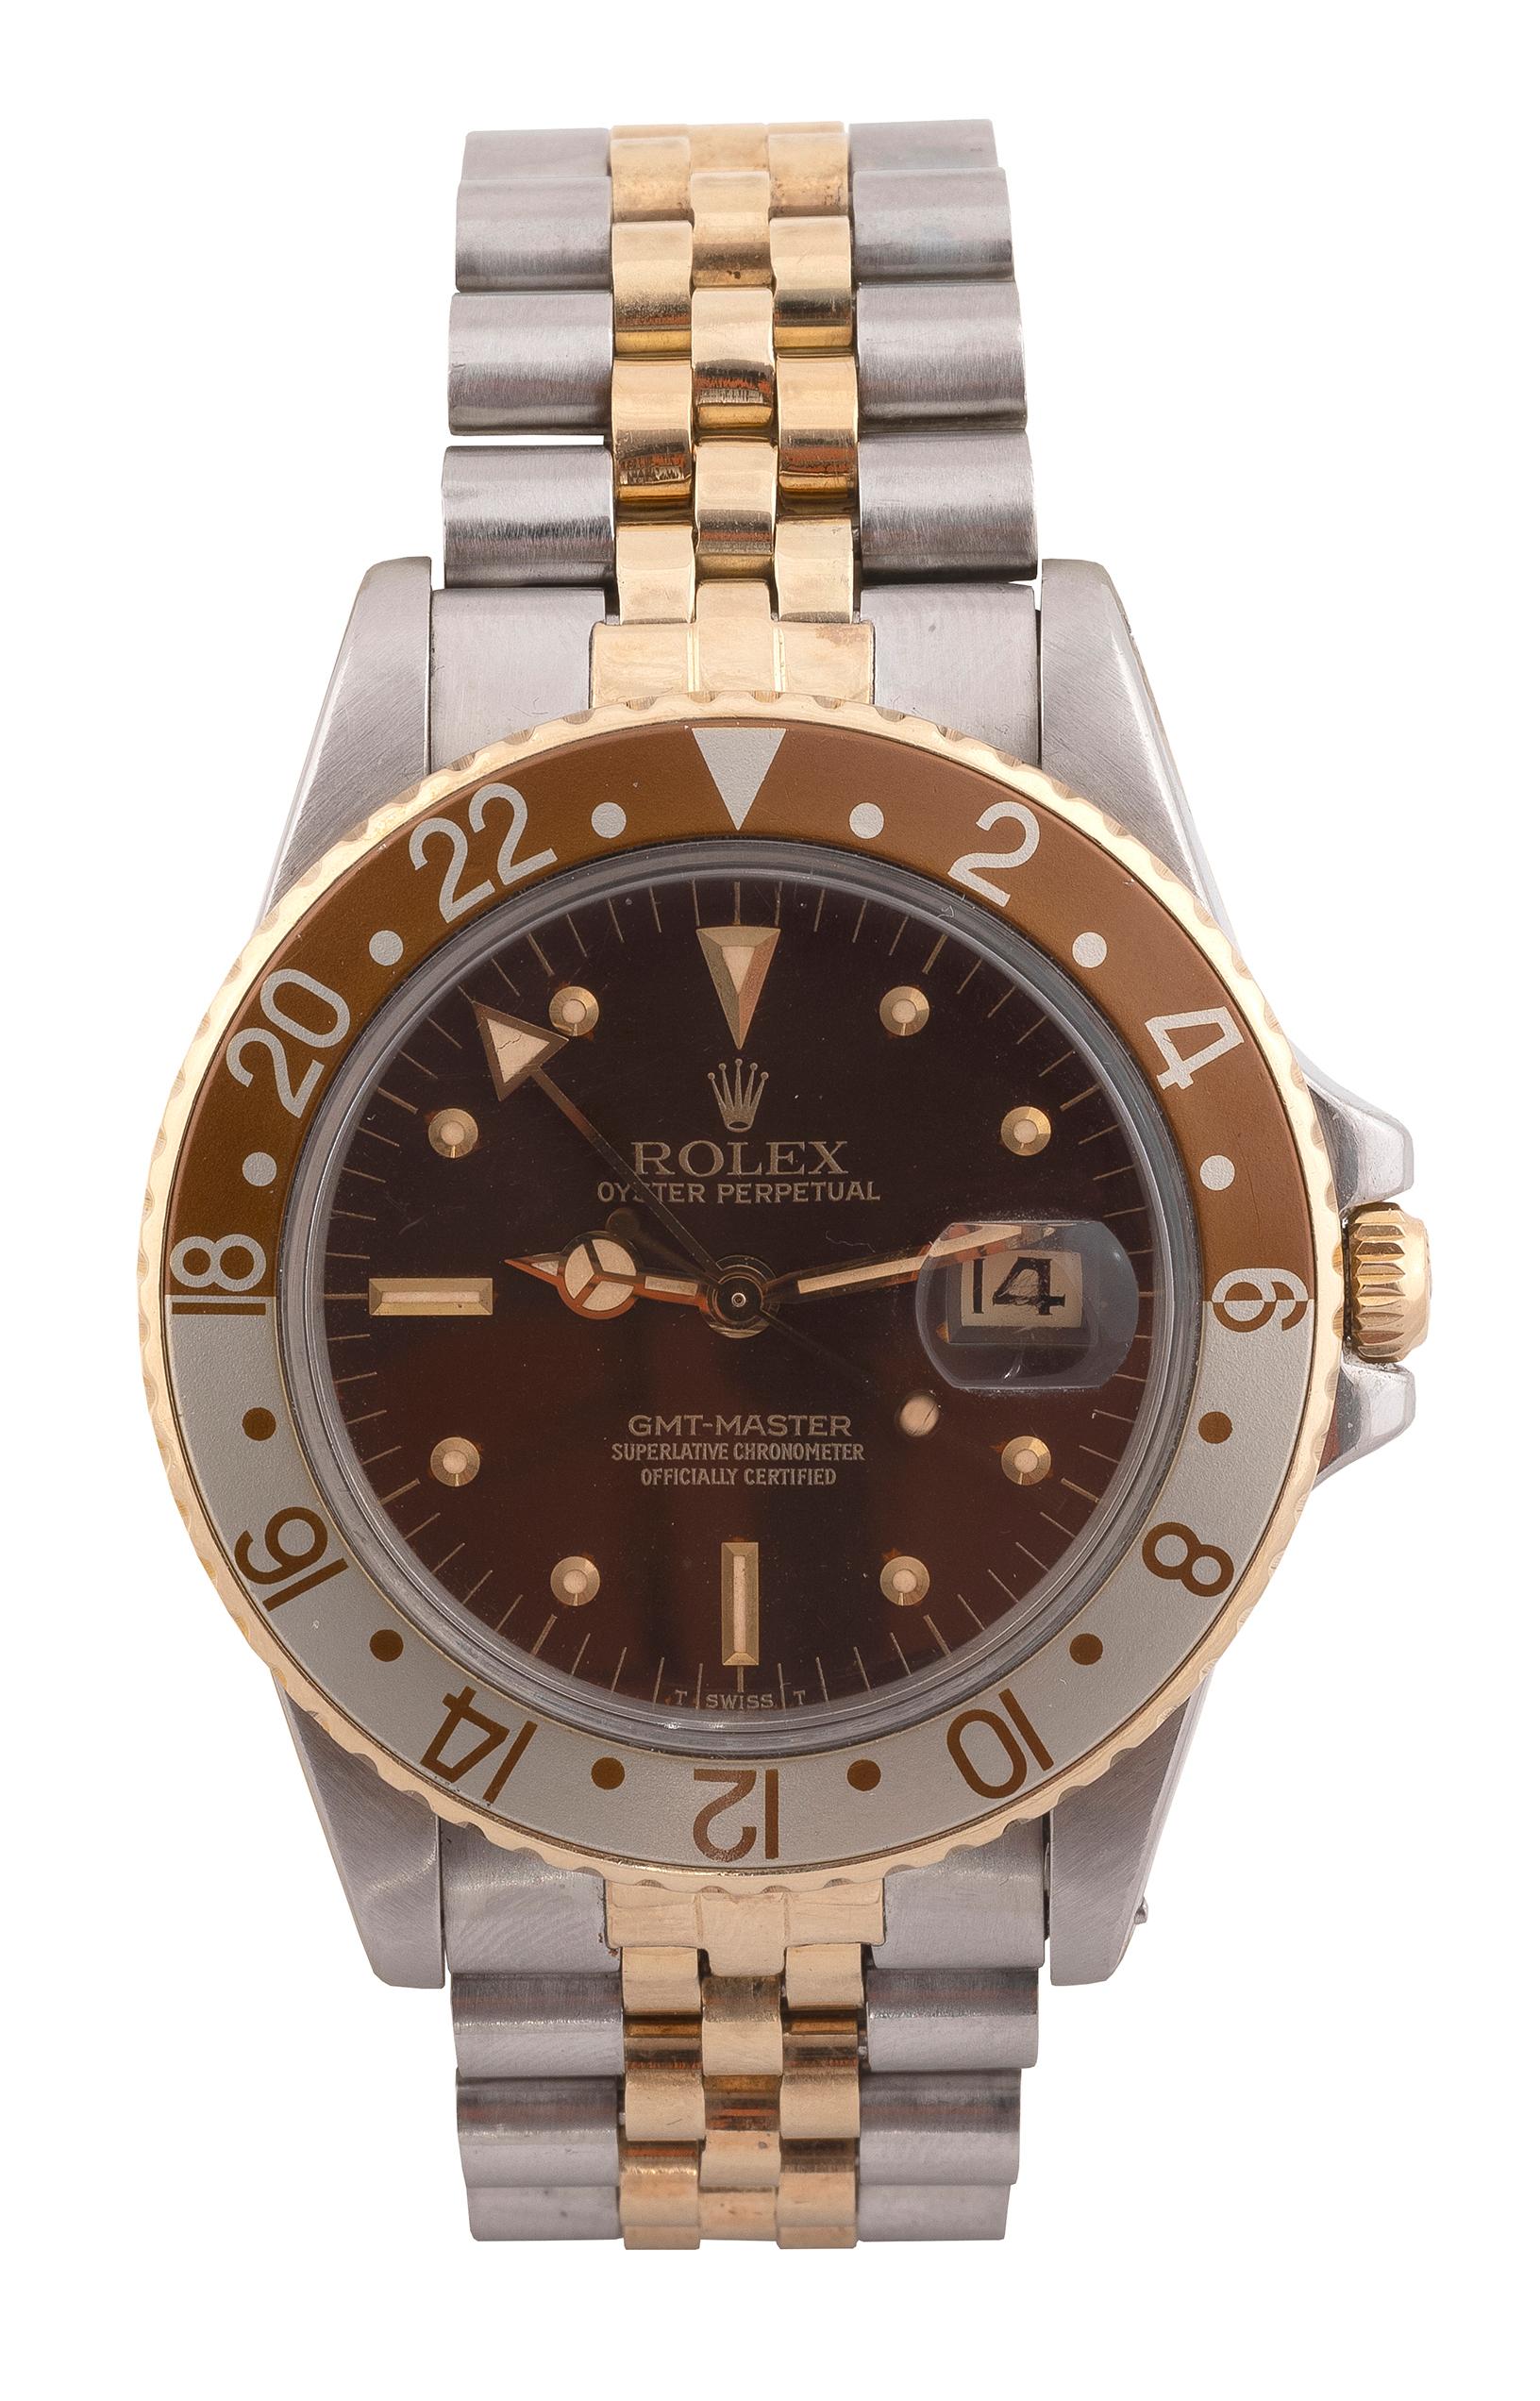 Contemporary Rolex Ref 16753 GMT-Master Steel and Gold Oyster Perpetual Wristwatch